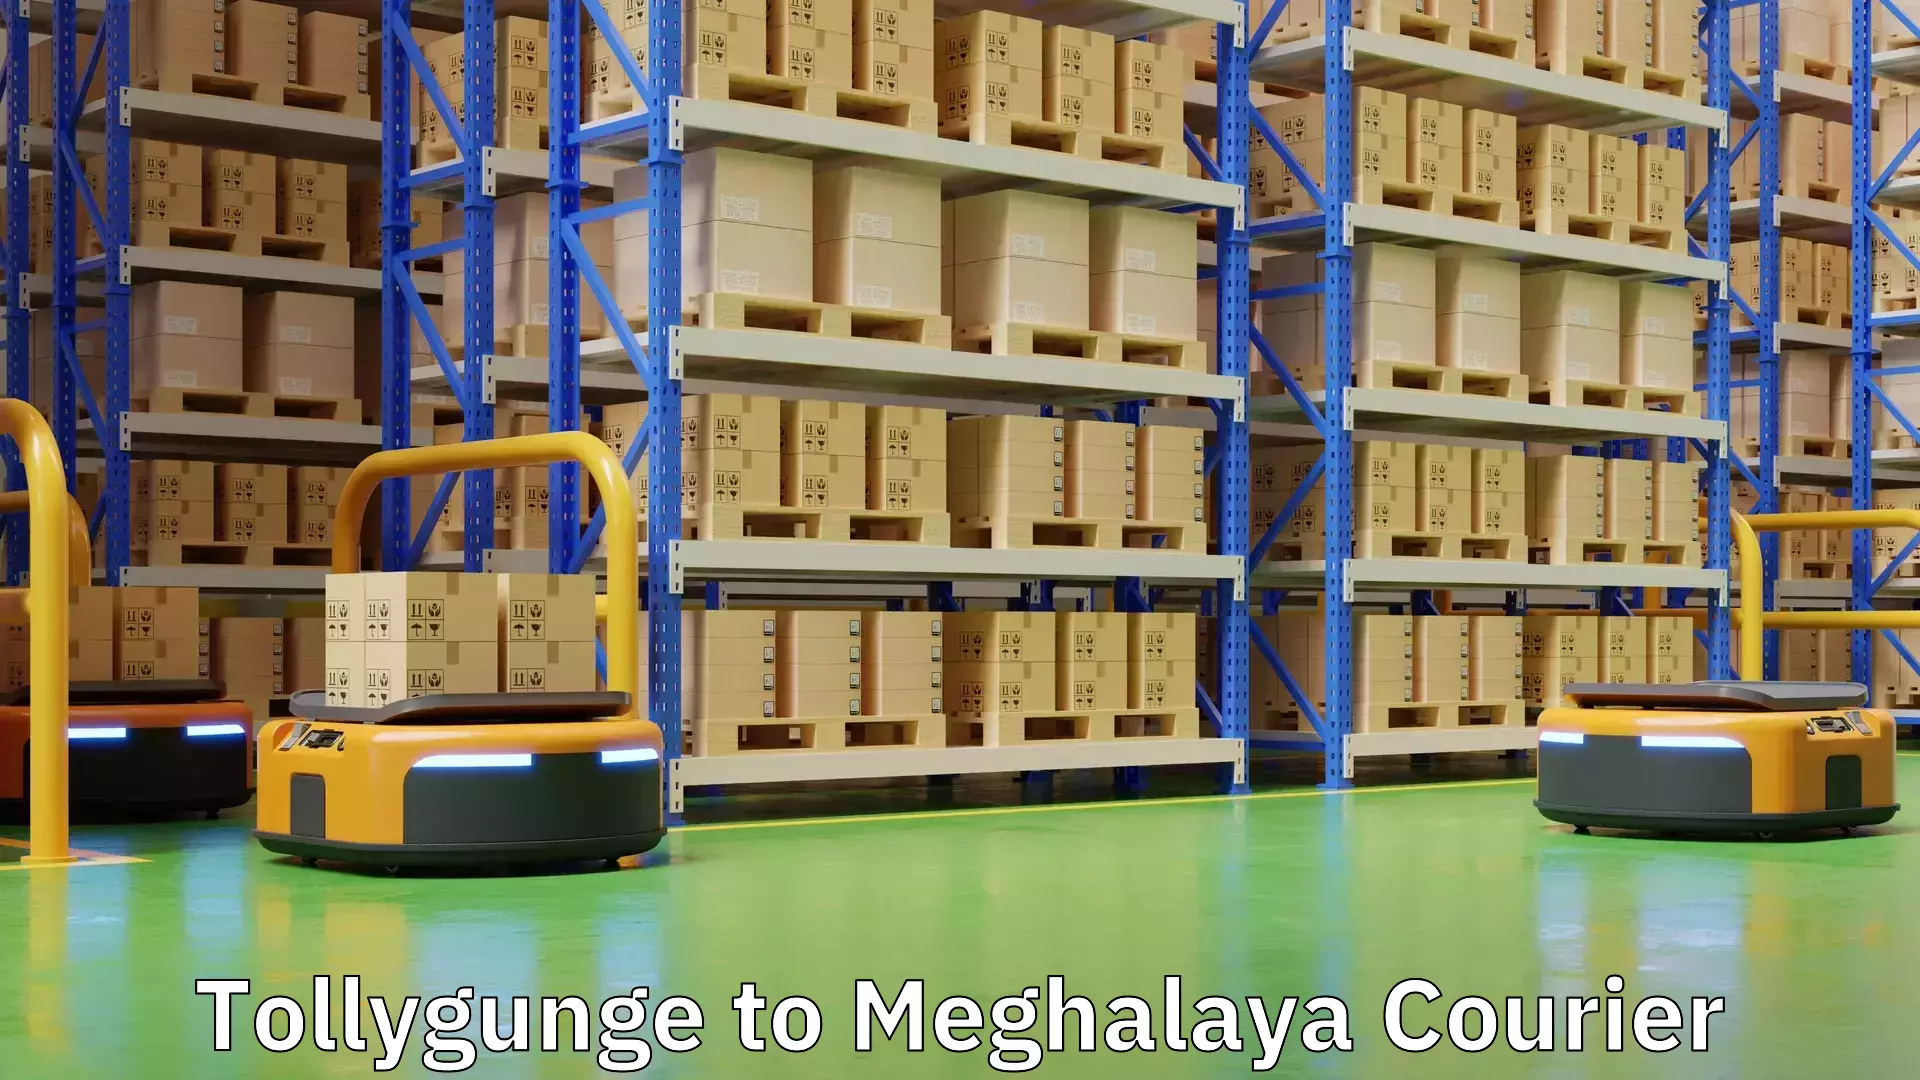 24-hour courier service Tollygunge to Meghalaya